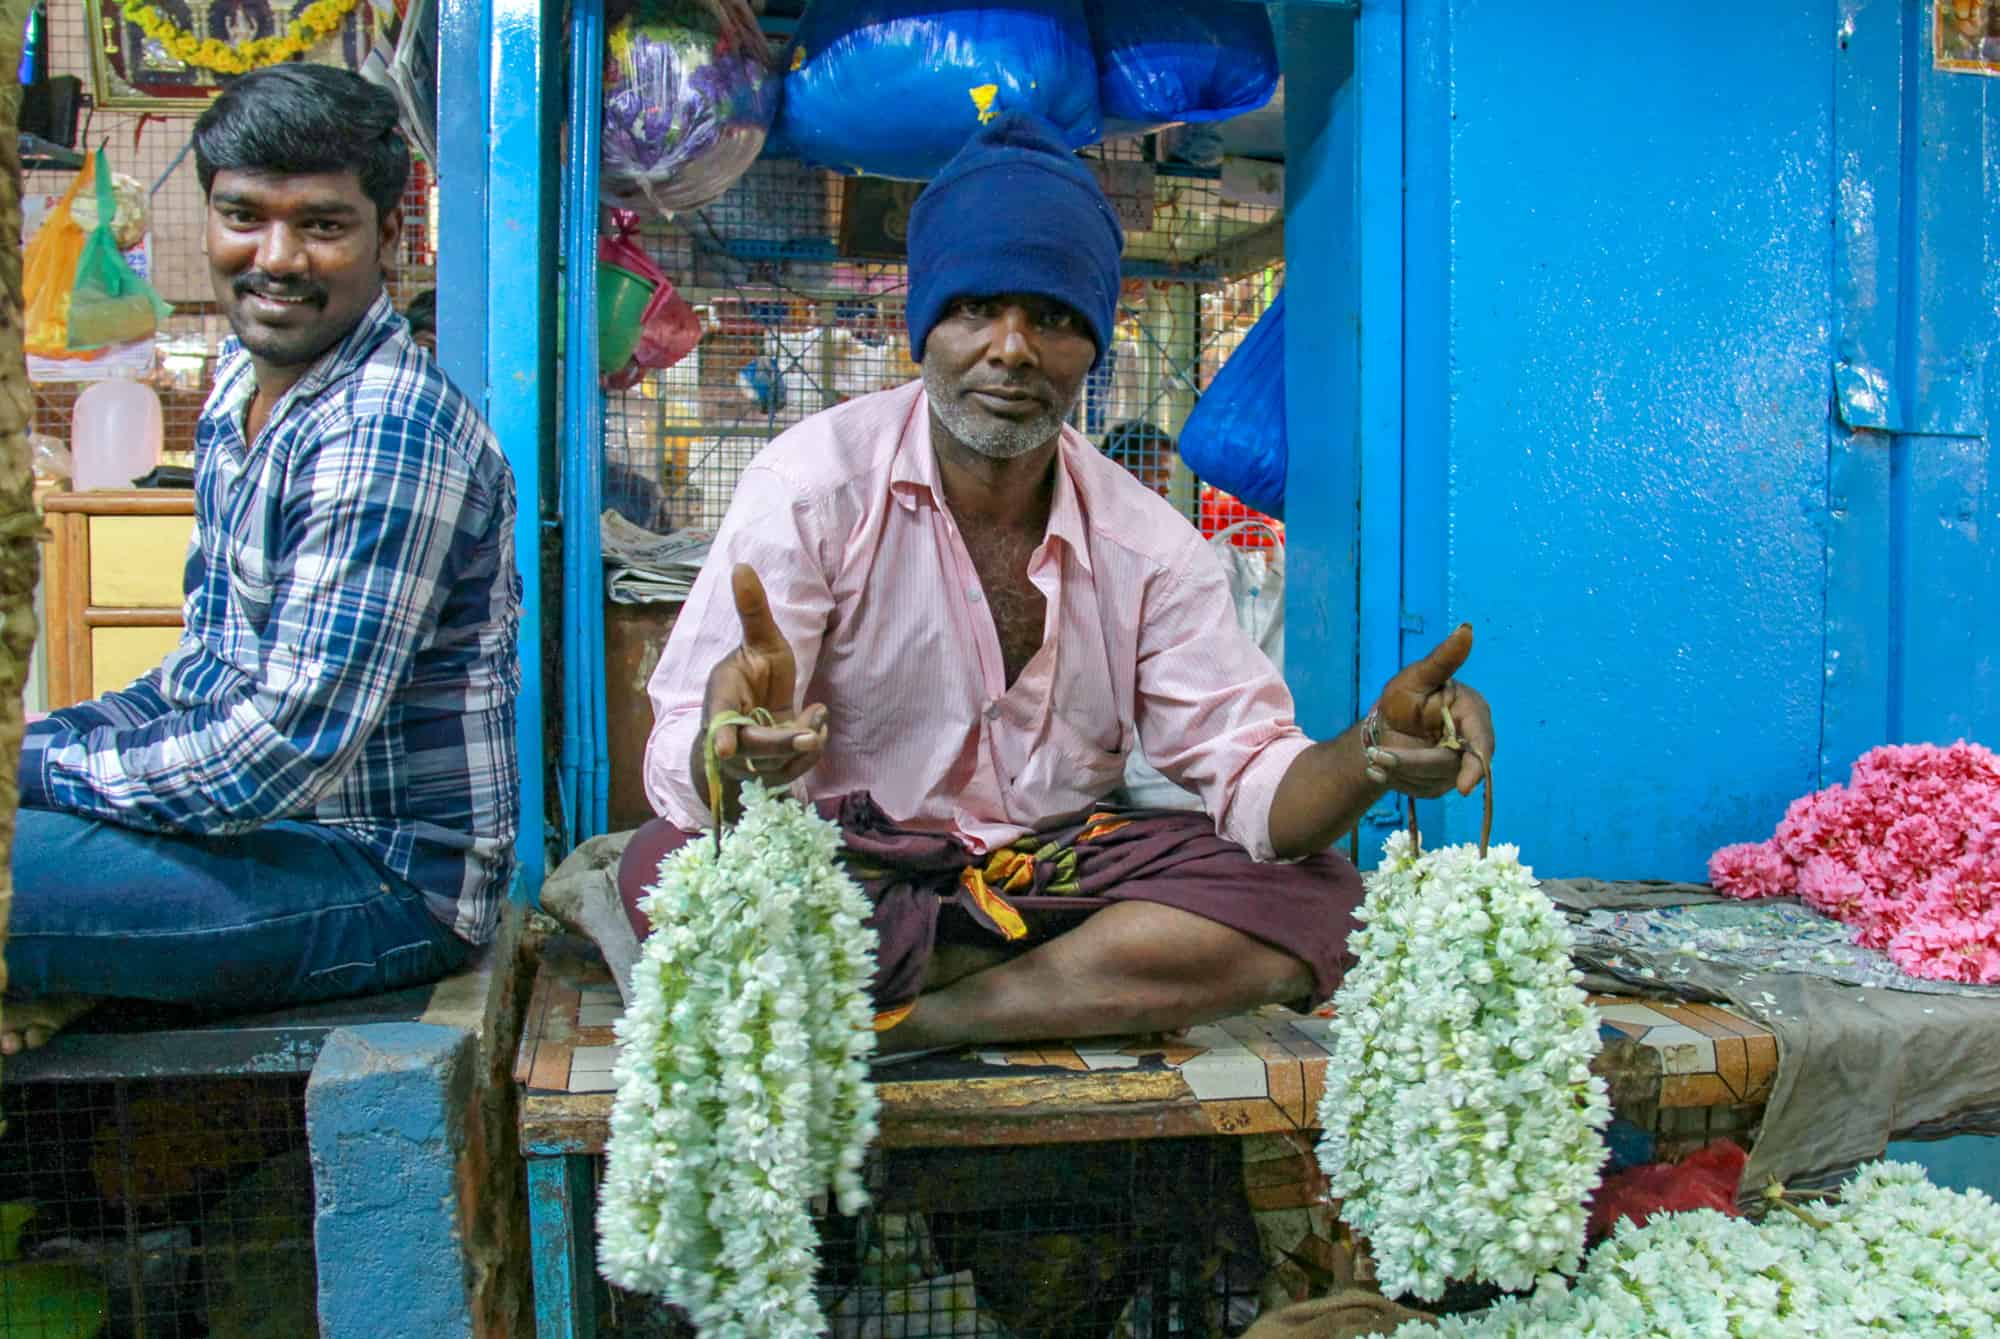 Family bucket list - people at the Bangalore Flower Market